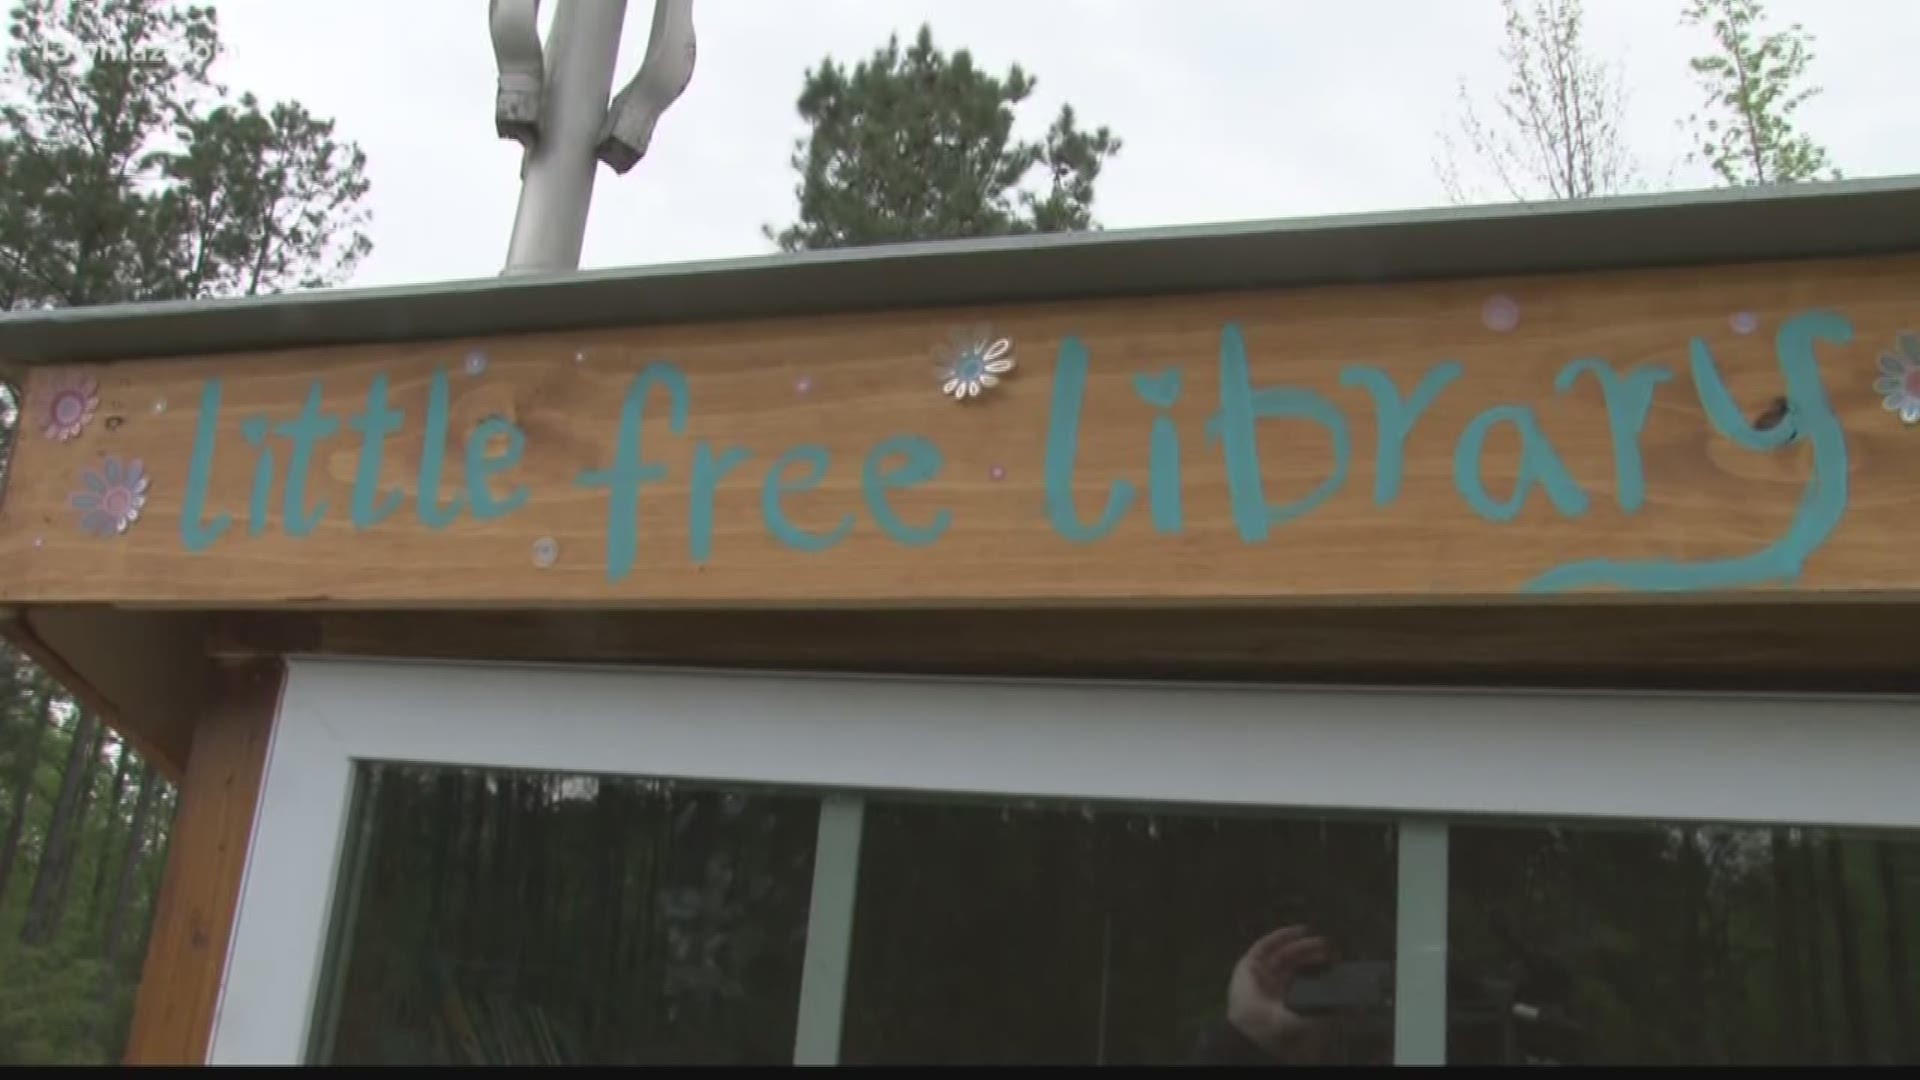 With schools and libraries closed due to COVID-19, Twiggs County Schools is challenging families to build their own 'Little Free Libraries.'